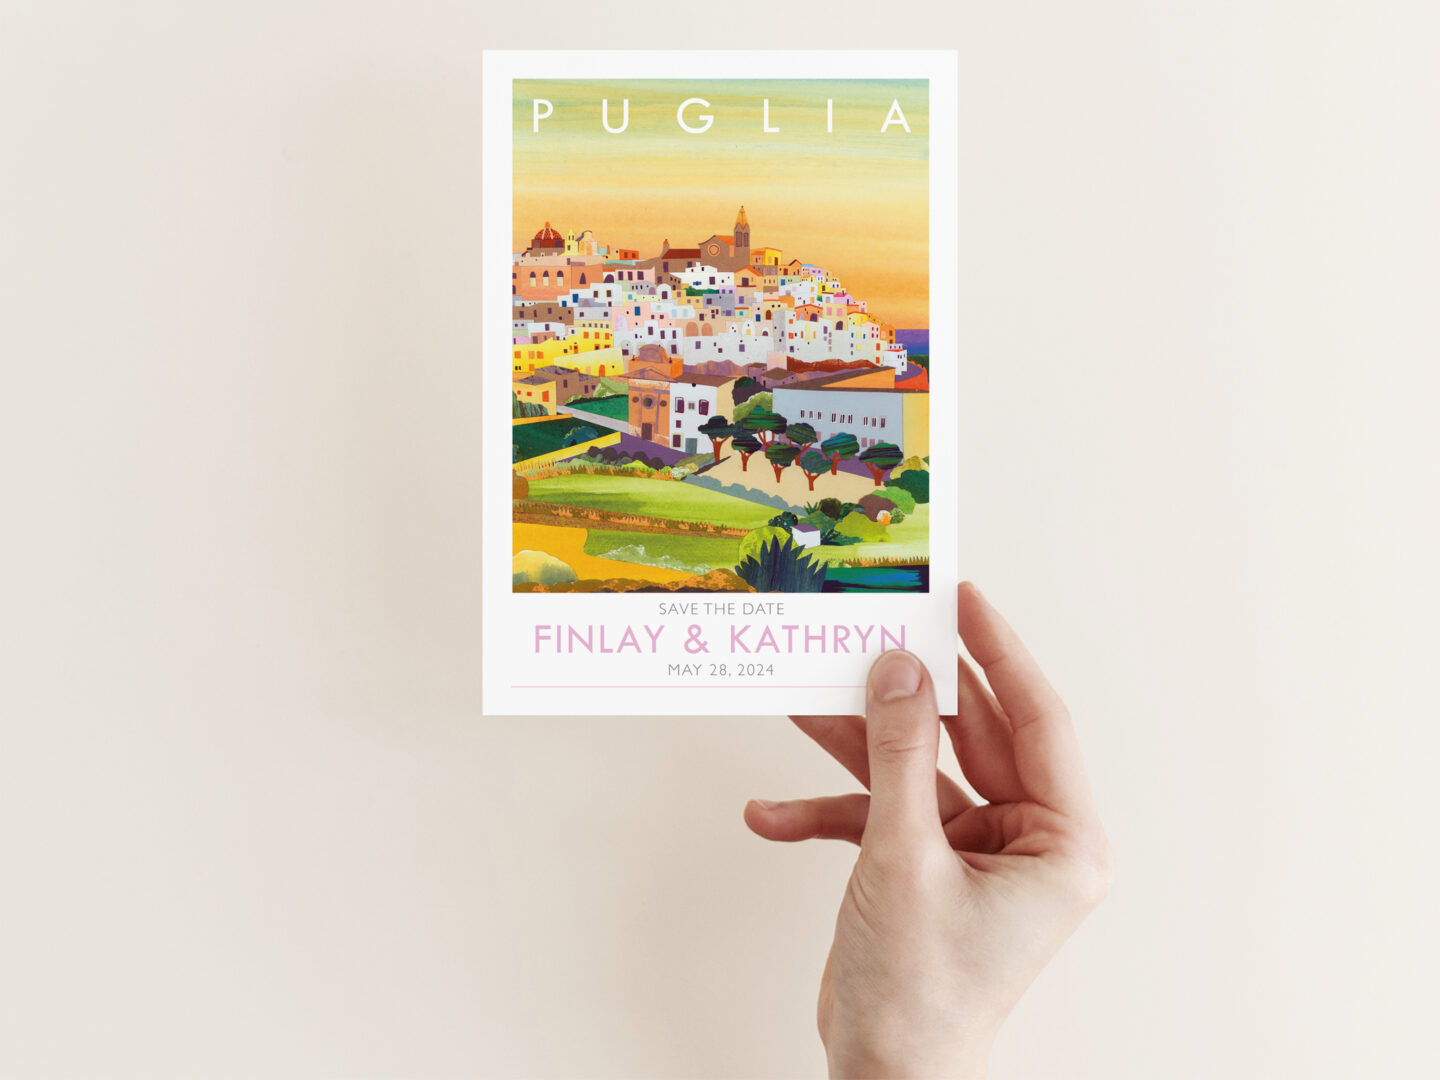 Puglia save the dates by Holly Anne Blake